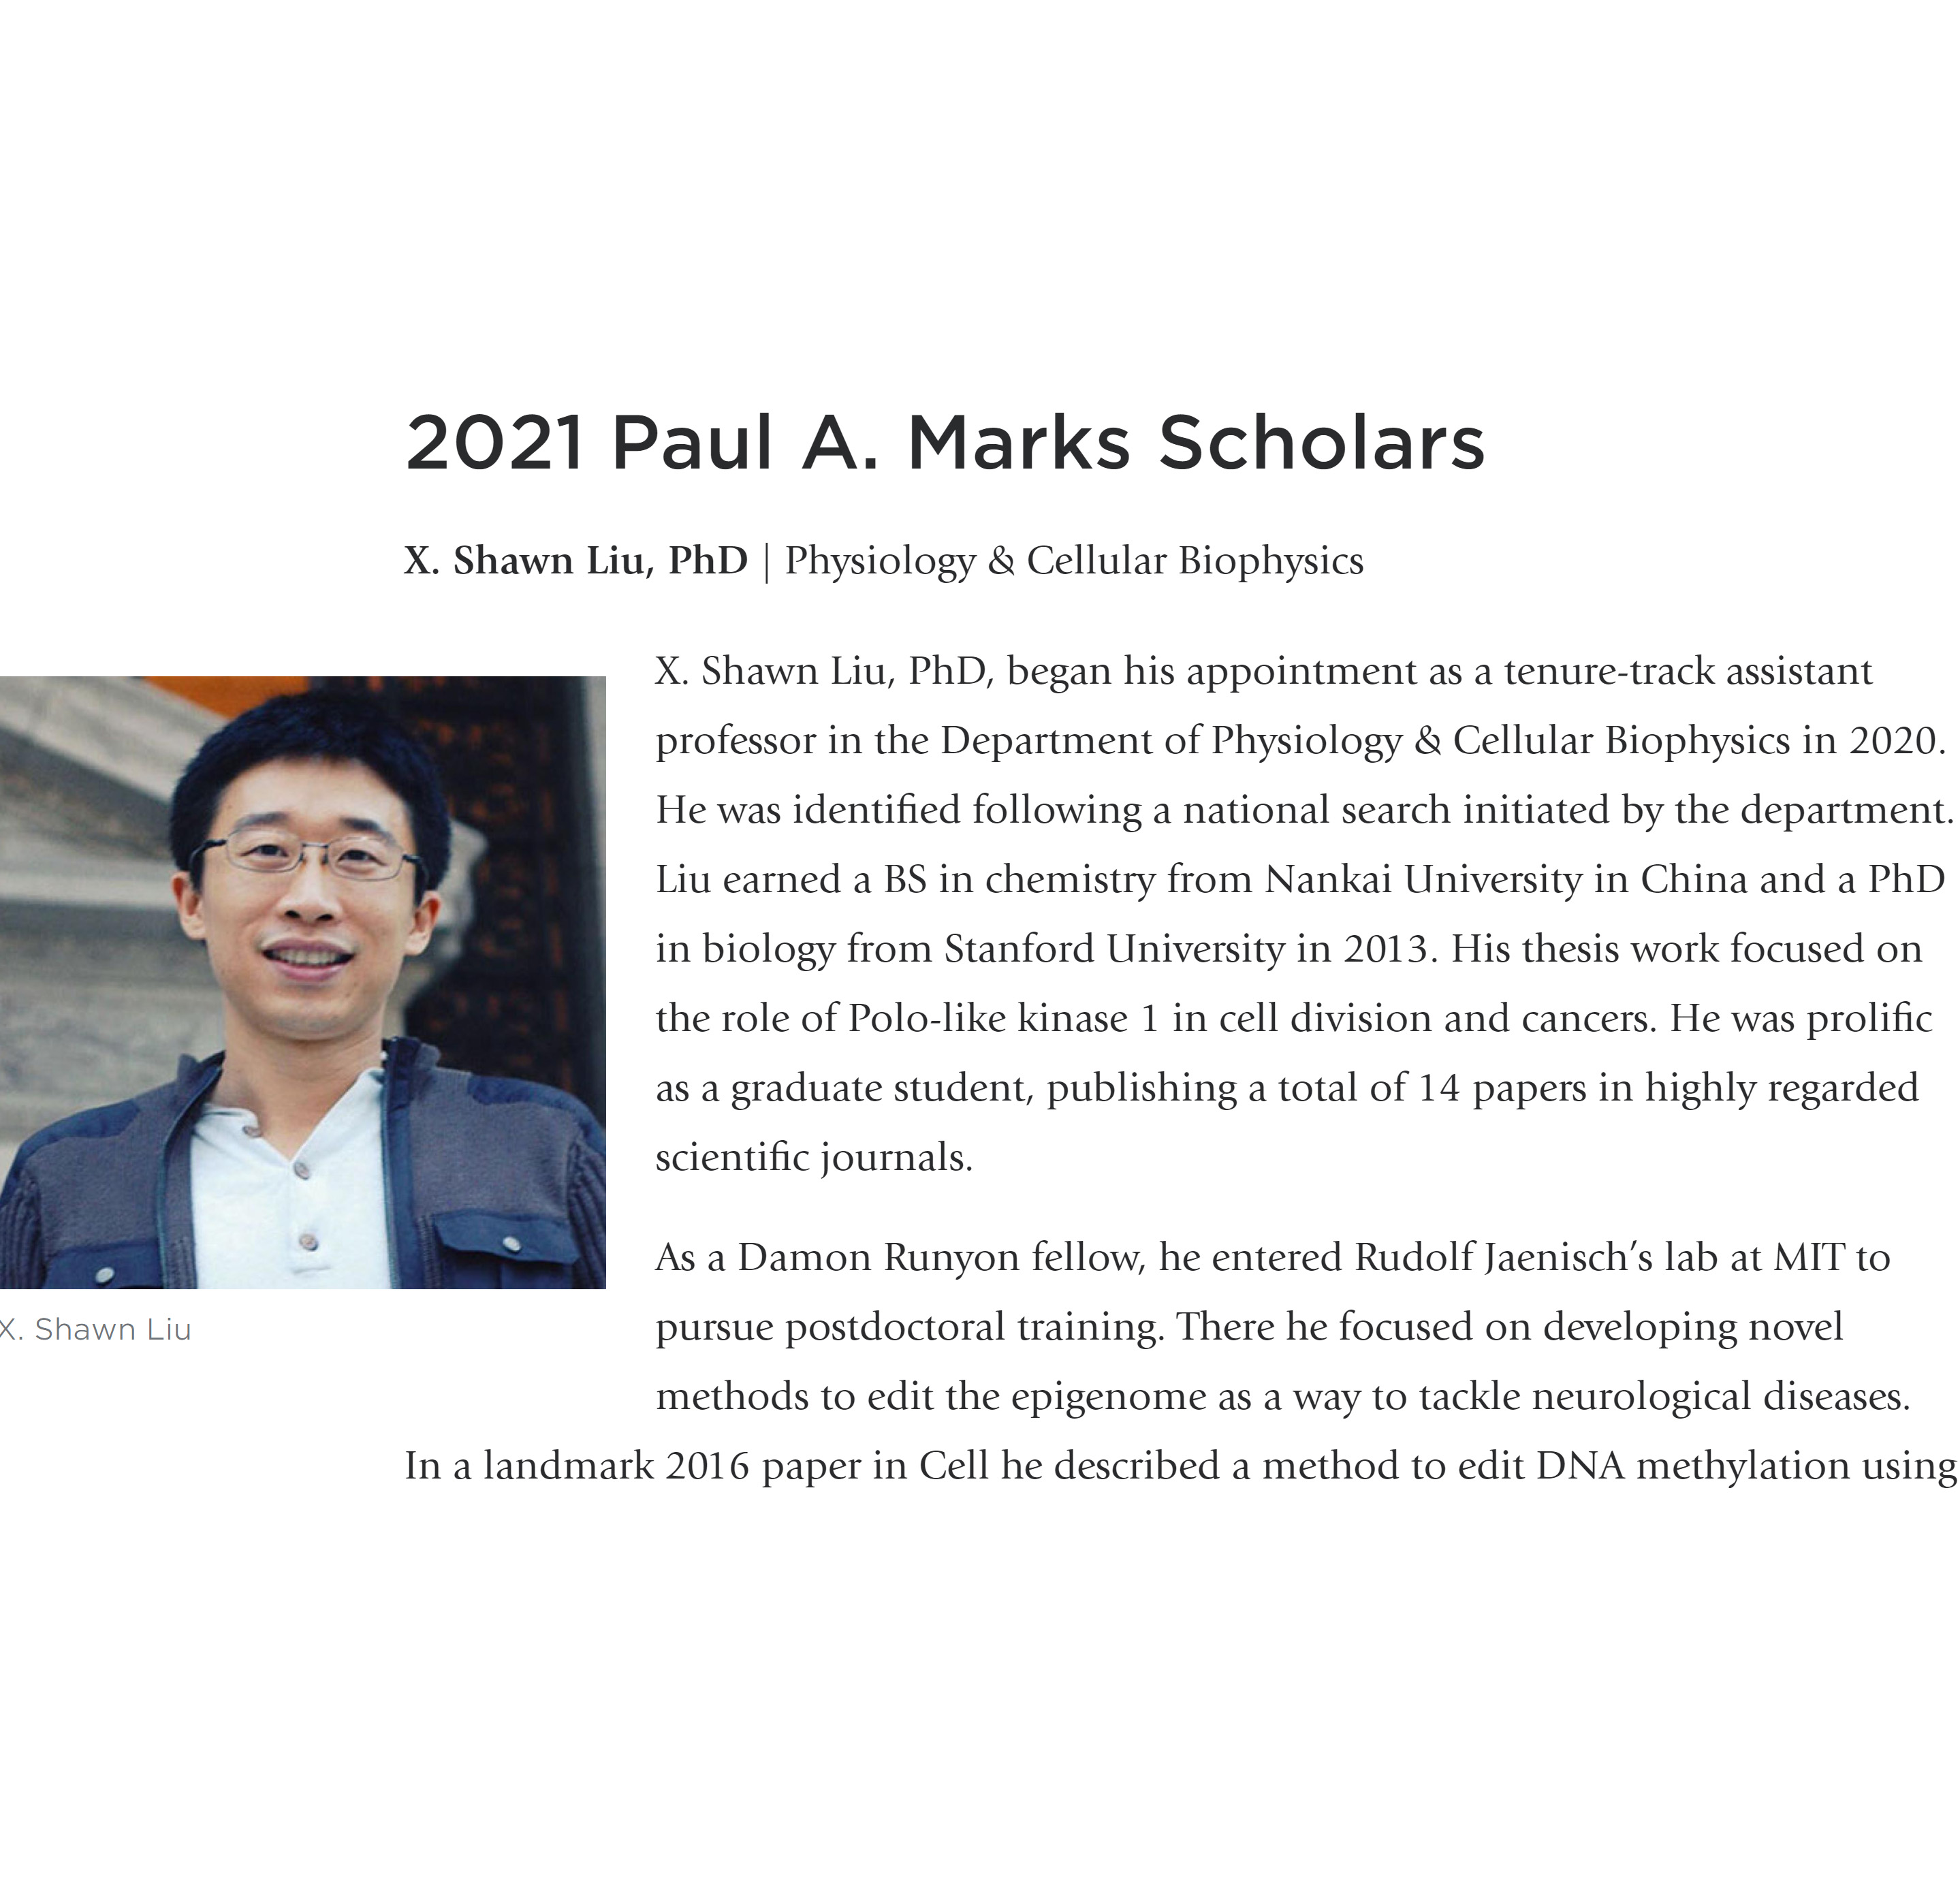 Shawn was selected as Paul Marks Scholar to support the research in his lab, June 21 2021. https://www.cuimc.columbia.edu/news/three-vp-s-scientists-selected-paul-marks-scholars